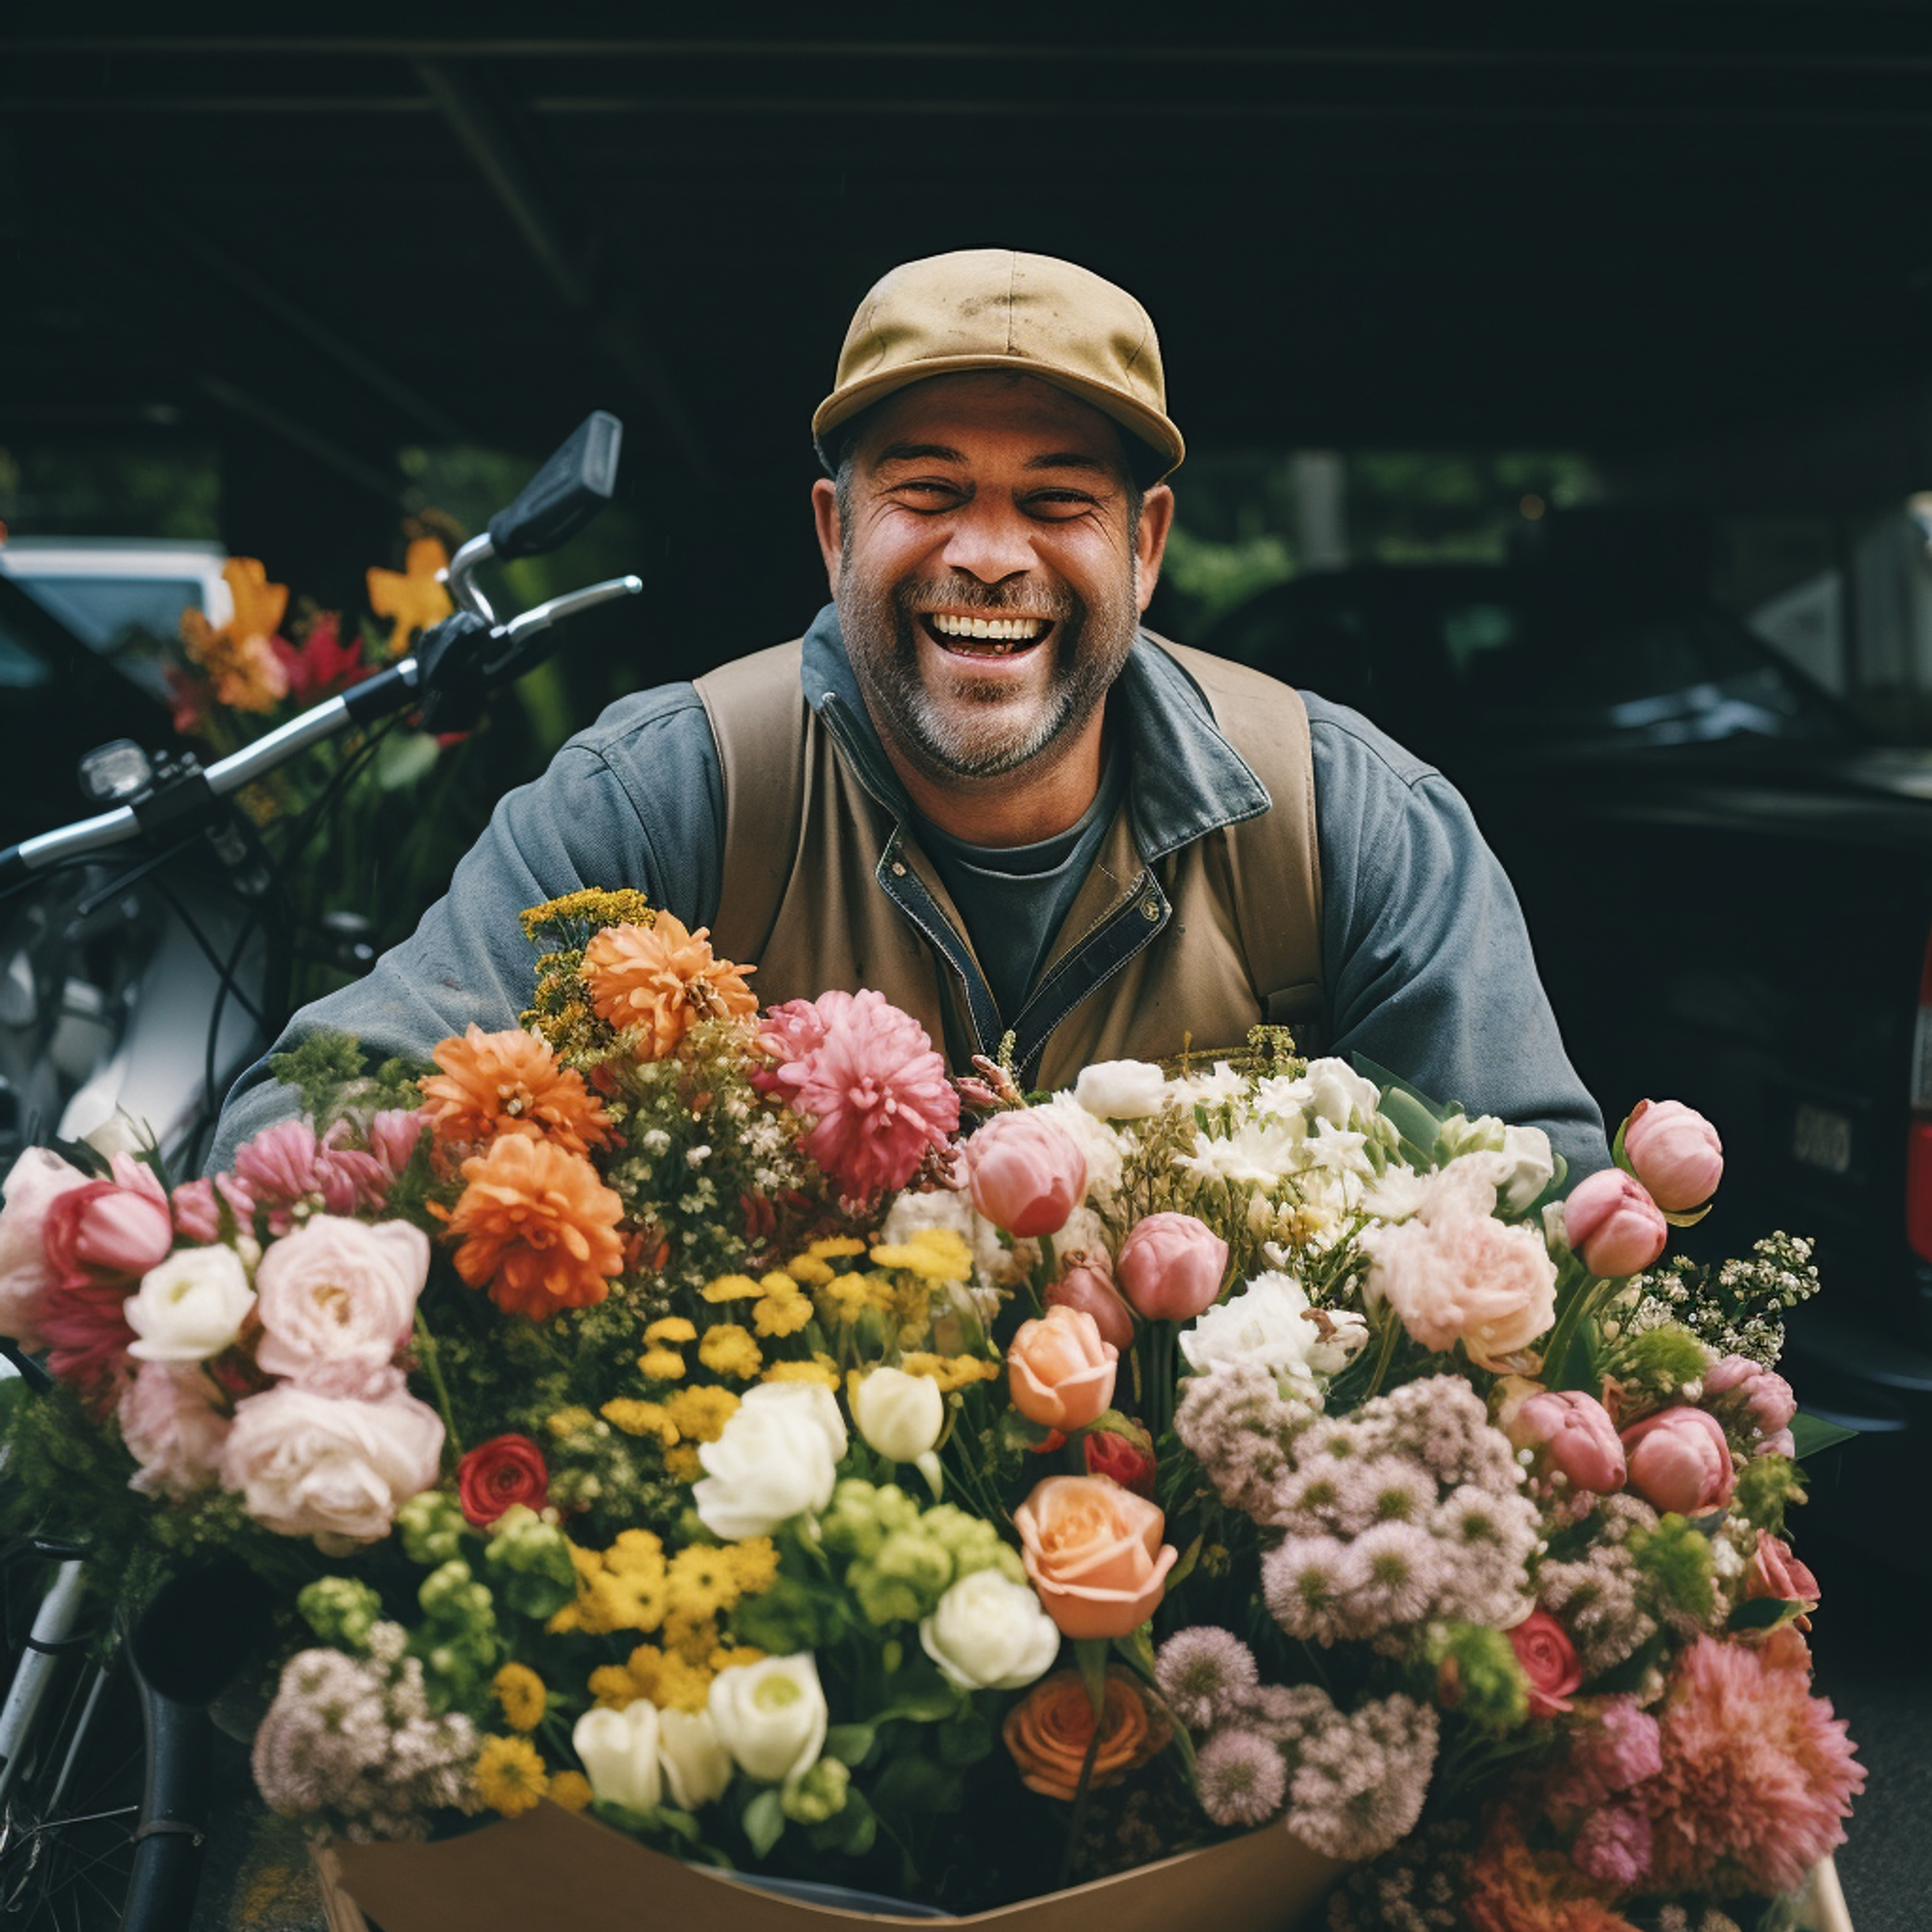 Flower delivery in action. Smiling man wearing a cap and apron delivering an assortment of colorful flowers, including roses and daisies